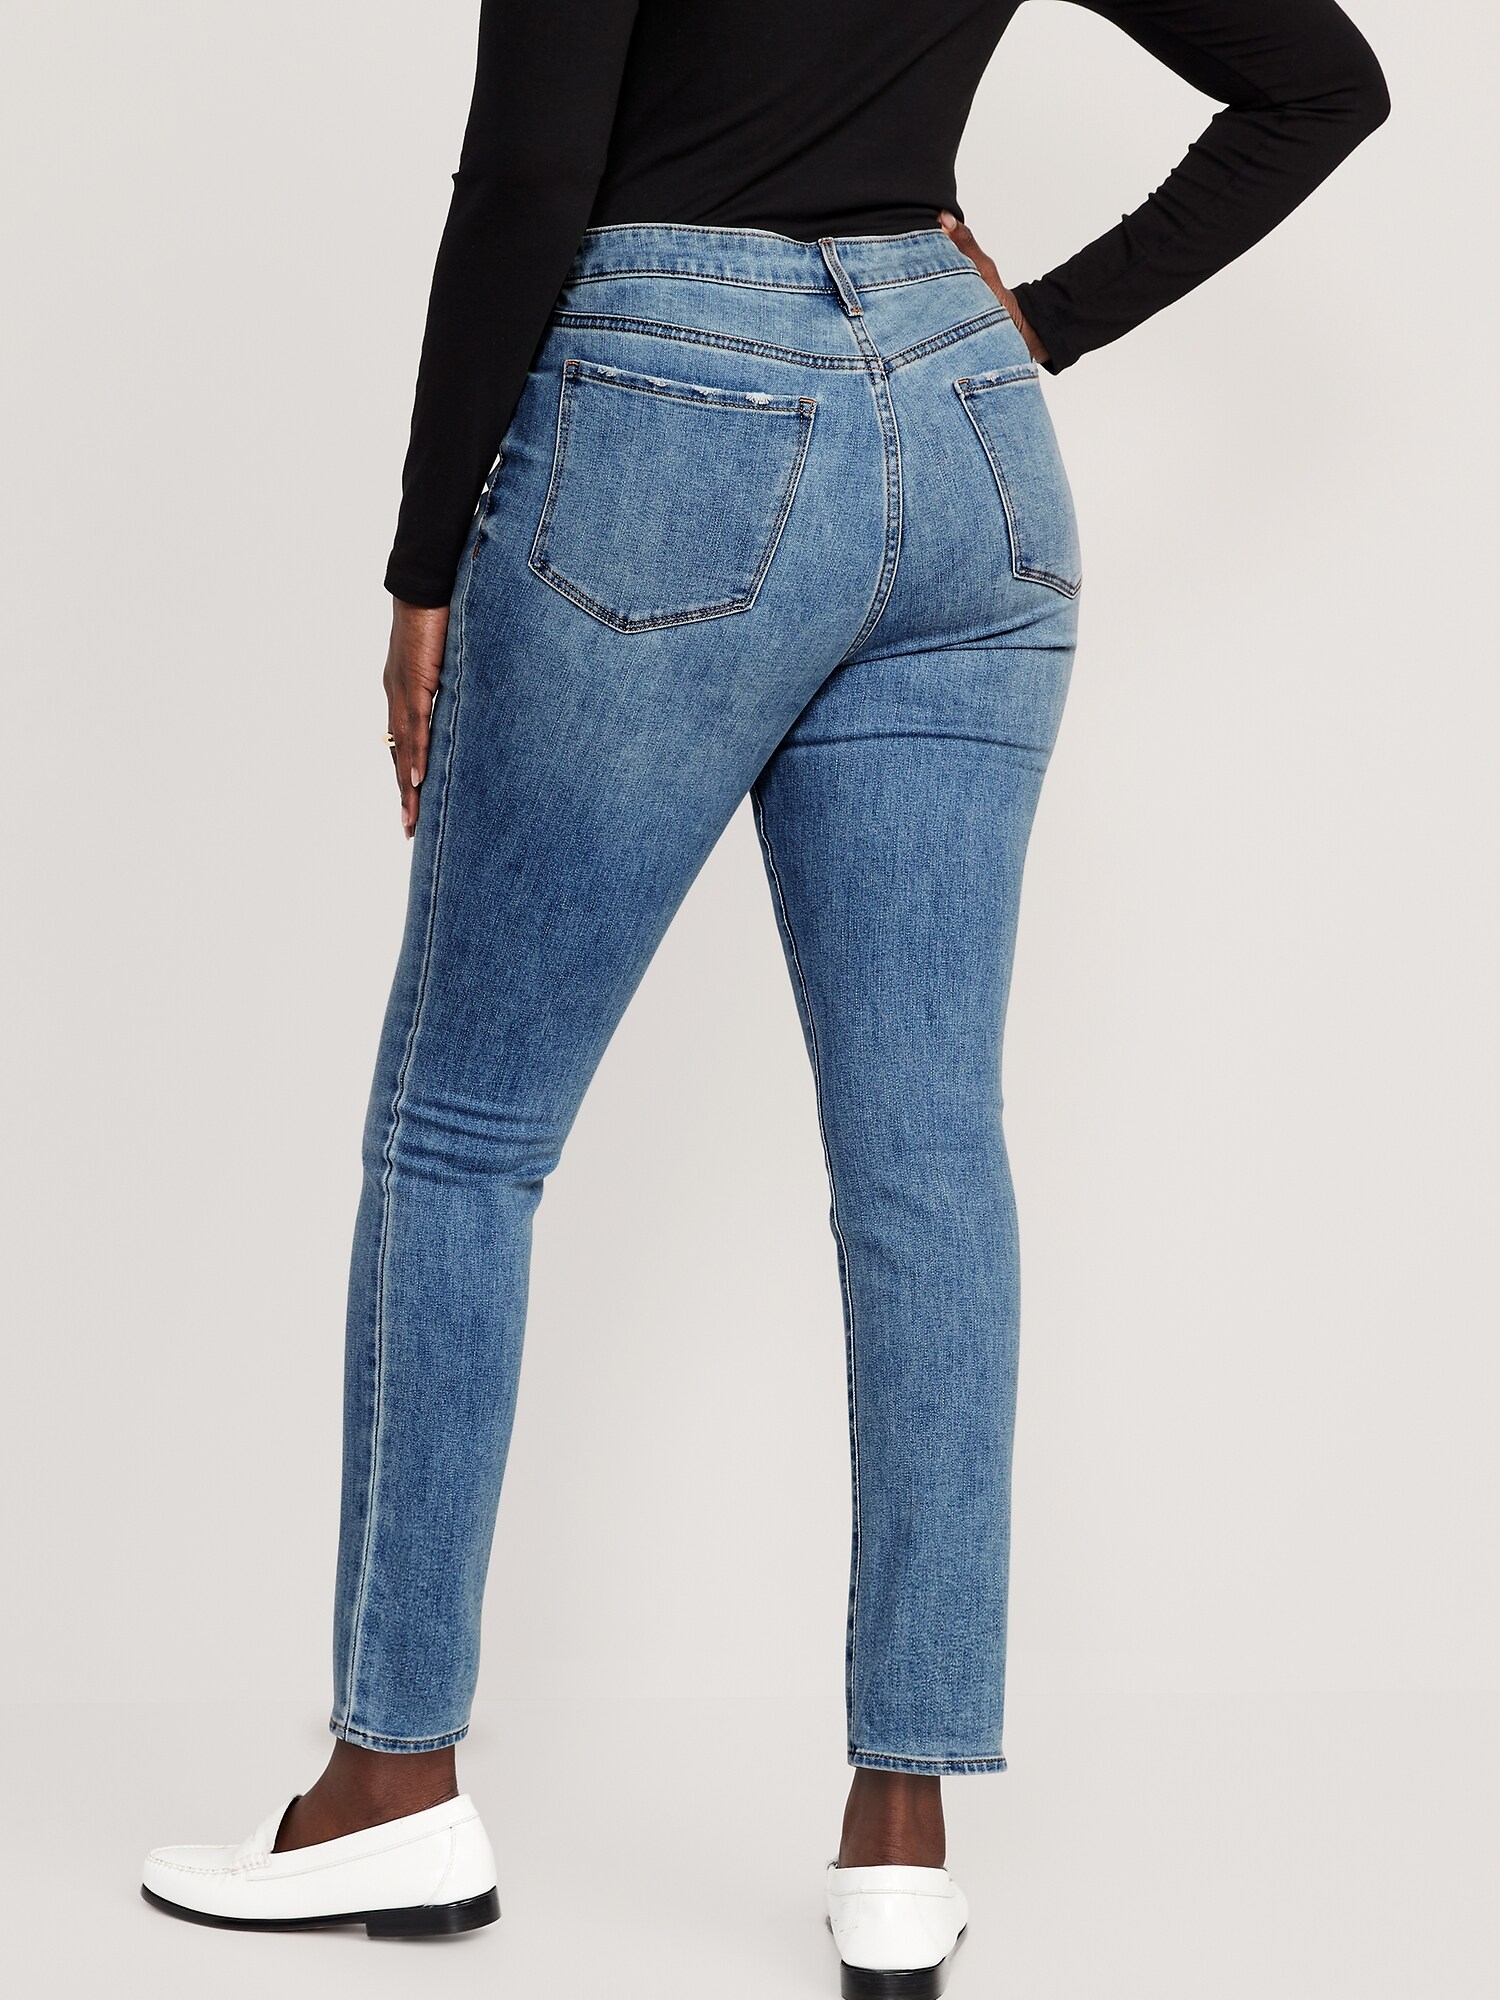 High Waisted Pop Icon Skinny Jeans For Women Old Navy